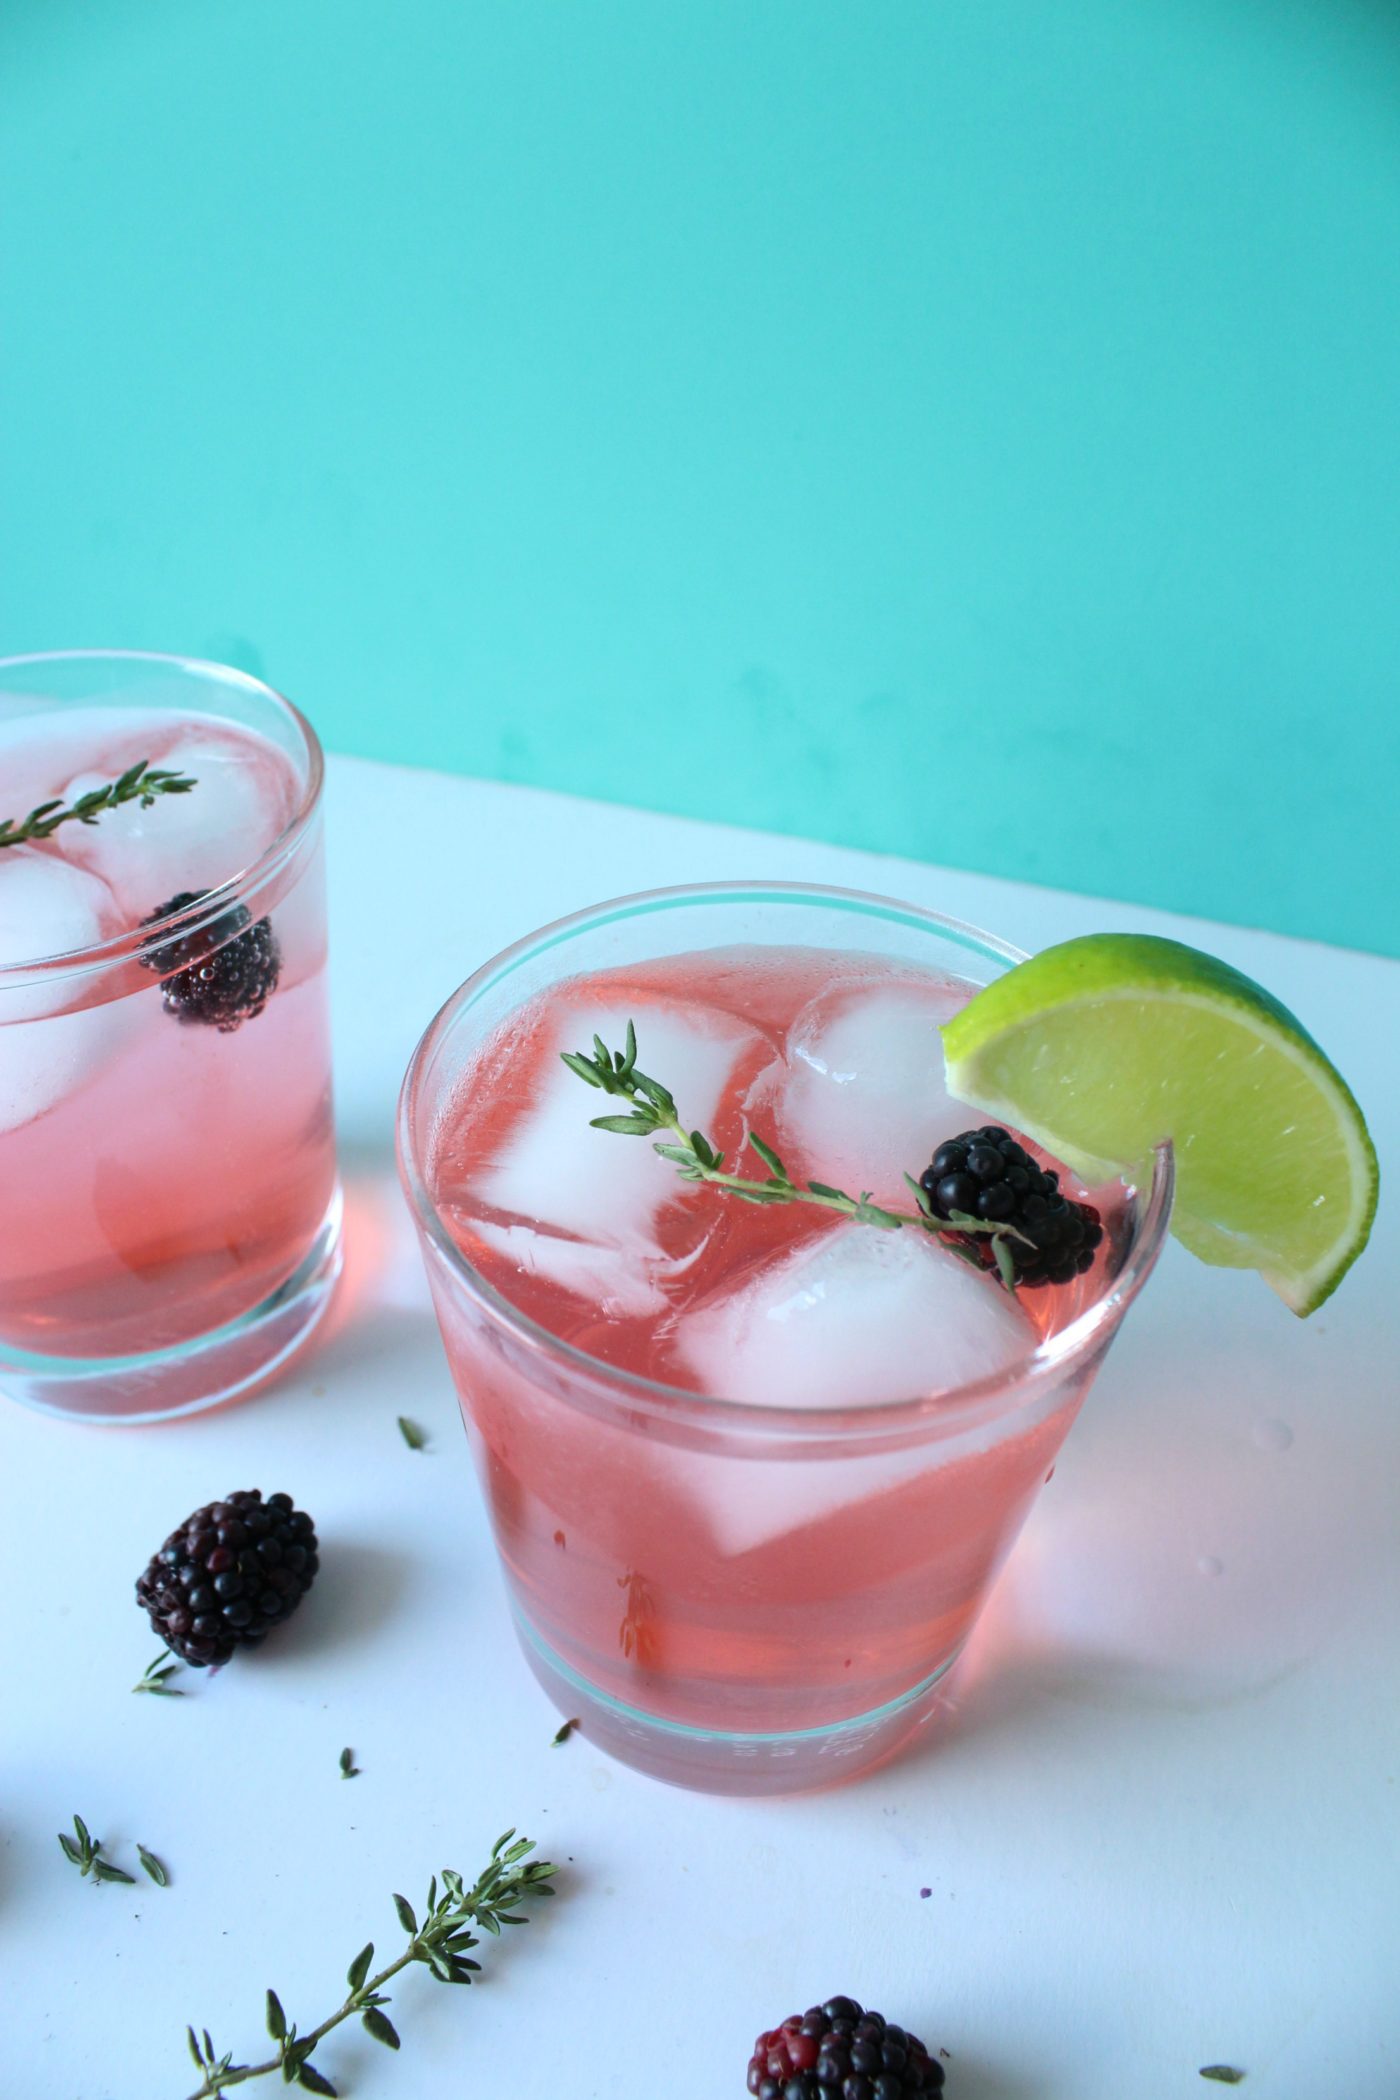 Blackberry gin and tonic | Eat.Drink.Frolic.